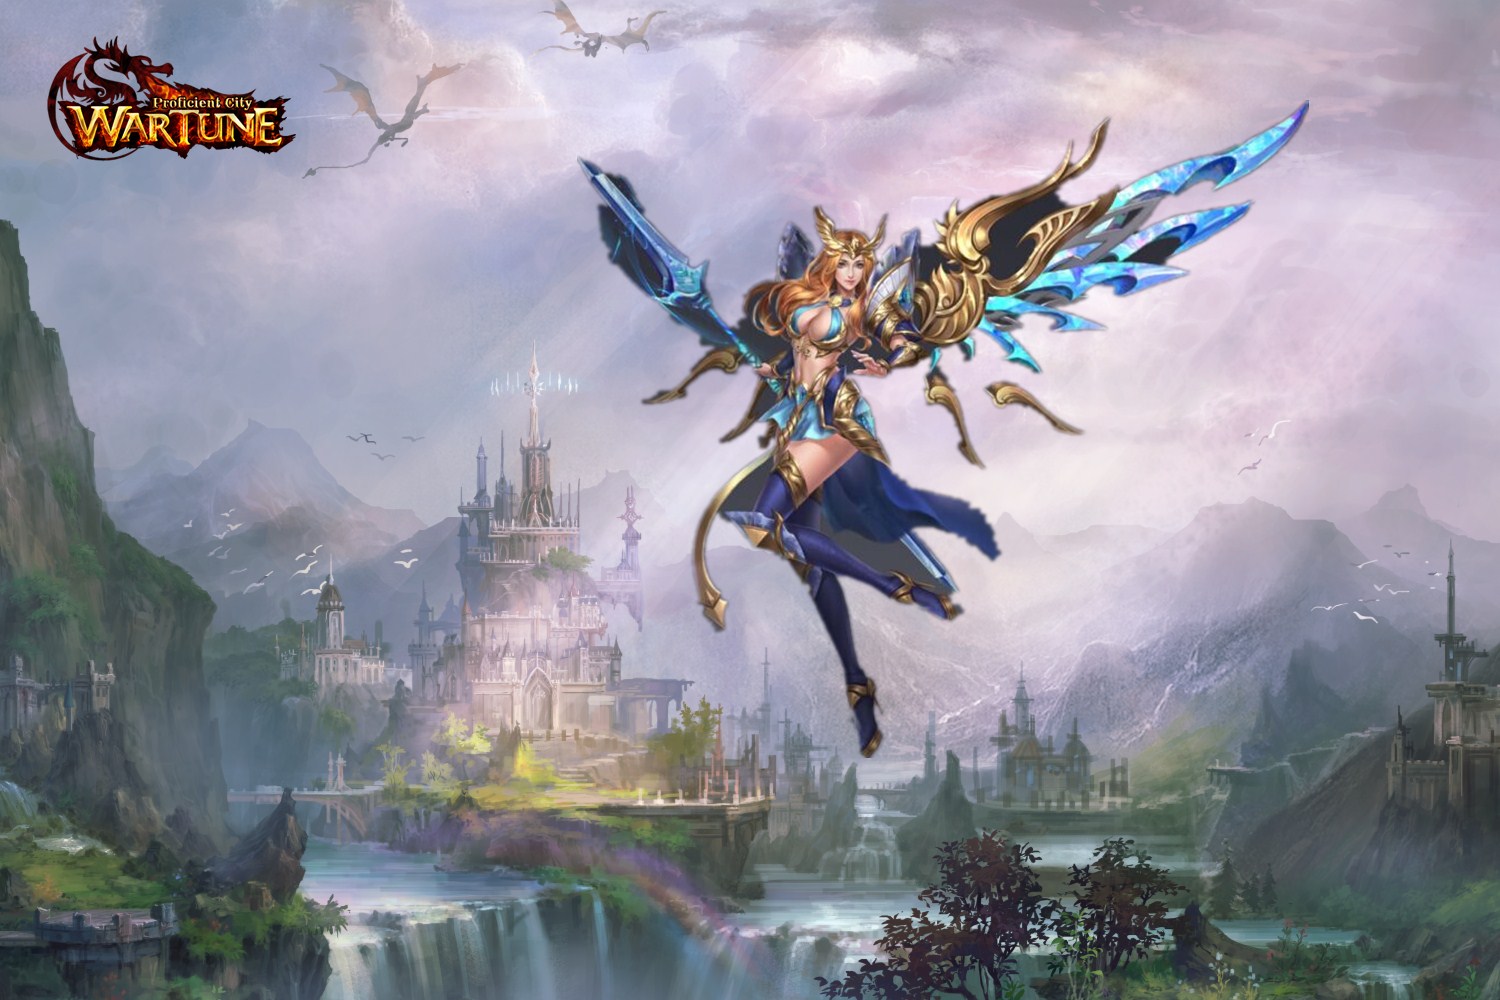 Wartune Backgrounds, Compatible - PC, Mobile, Gadgets| 1500x1000 px